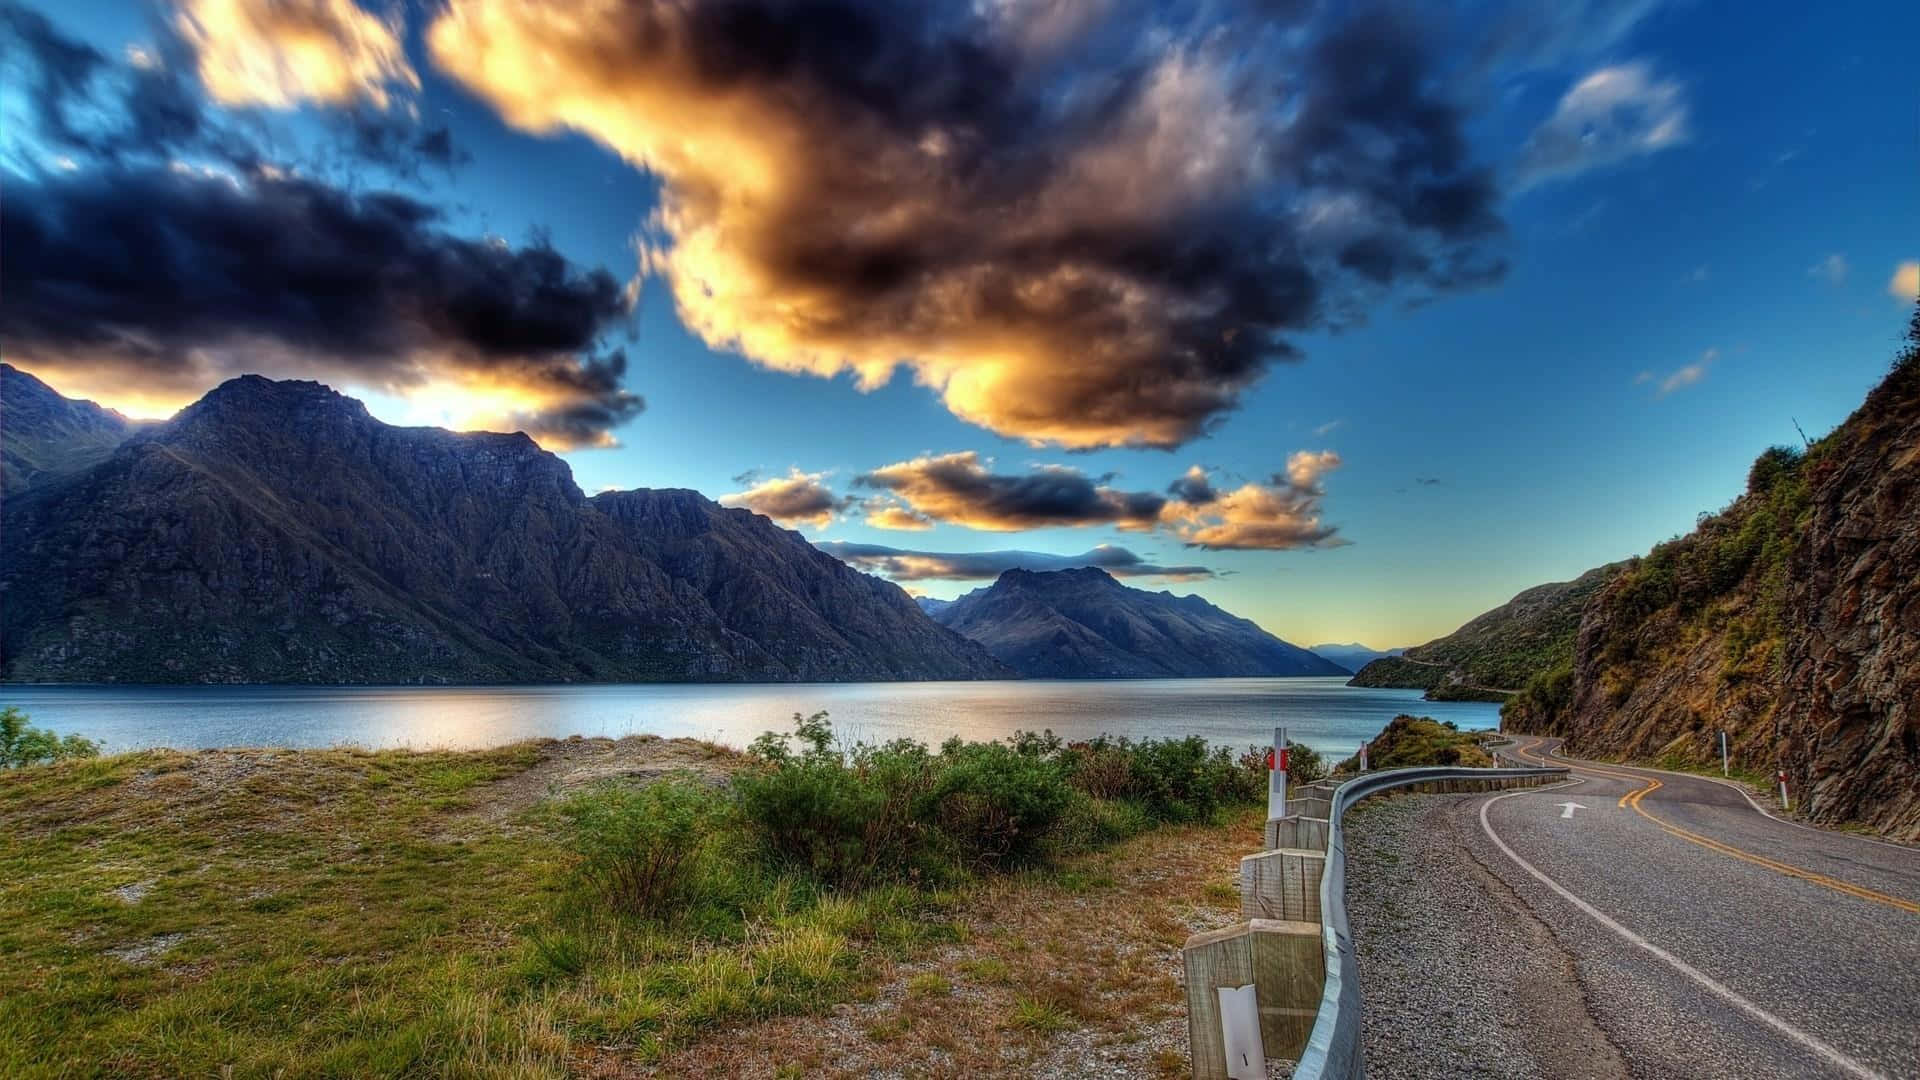 Explore the Natural Beauty of New Zealand